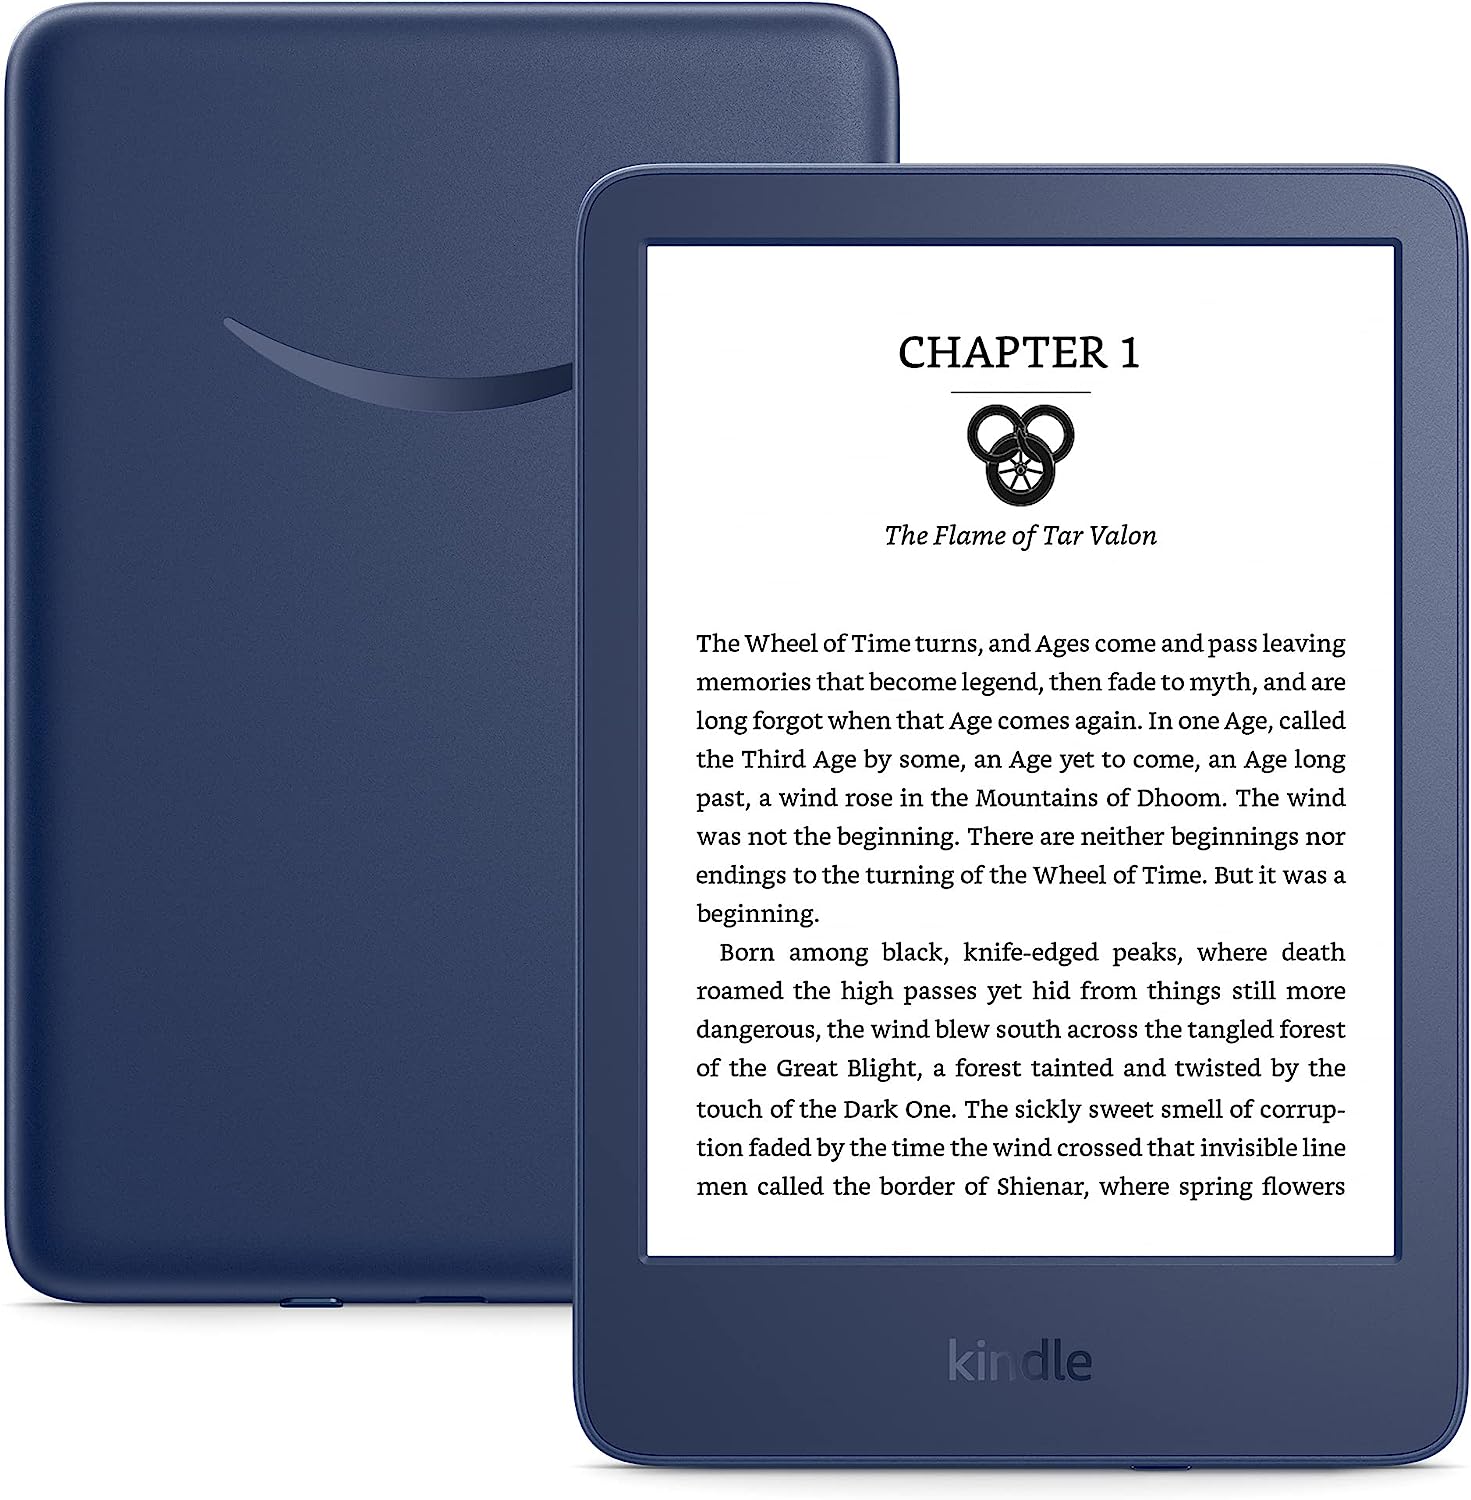 Your Kindle Scribe Just Got A Software Update – Here's What's New